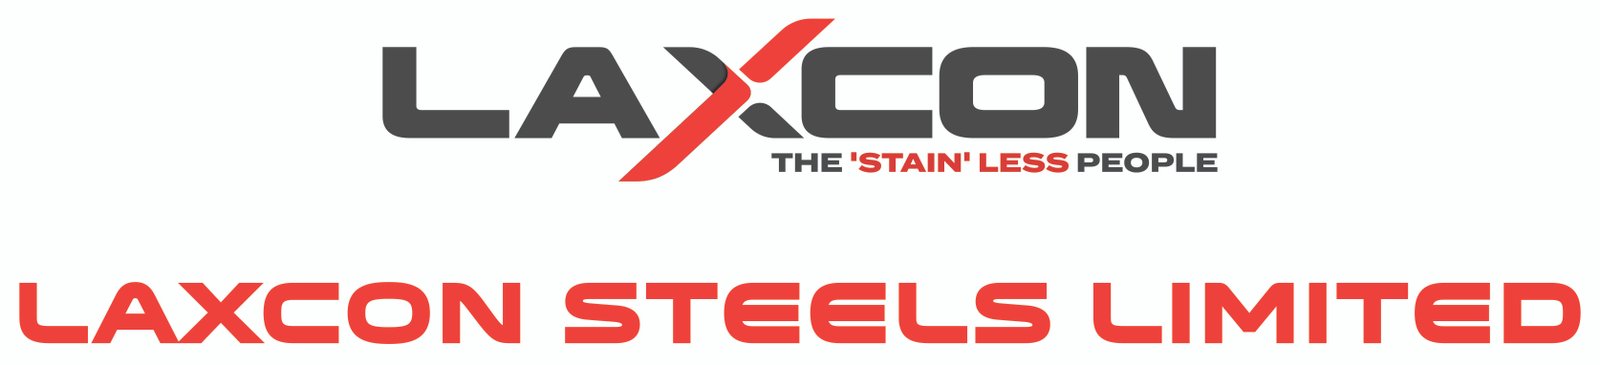 LAXCON STEELS LIMITED 